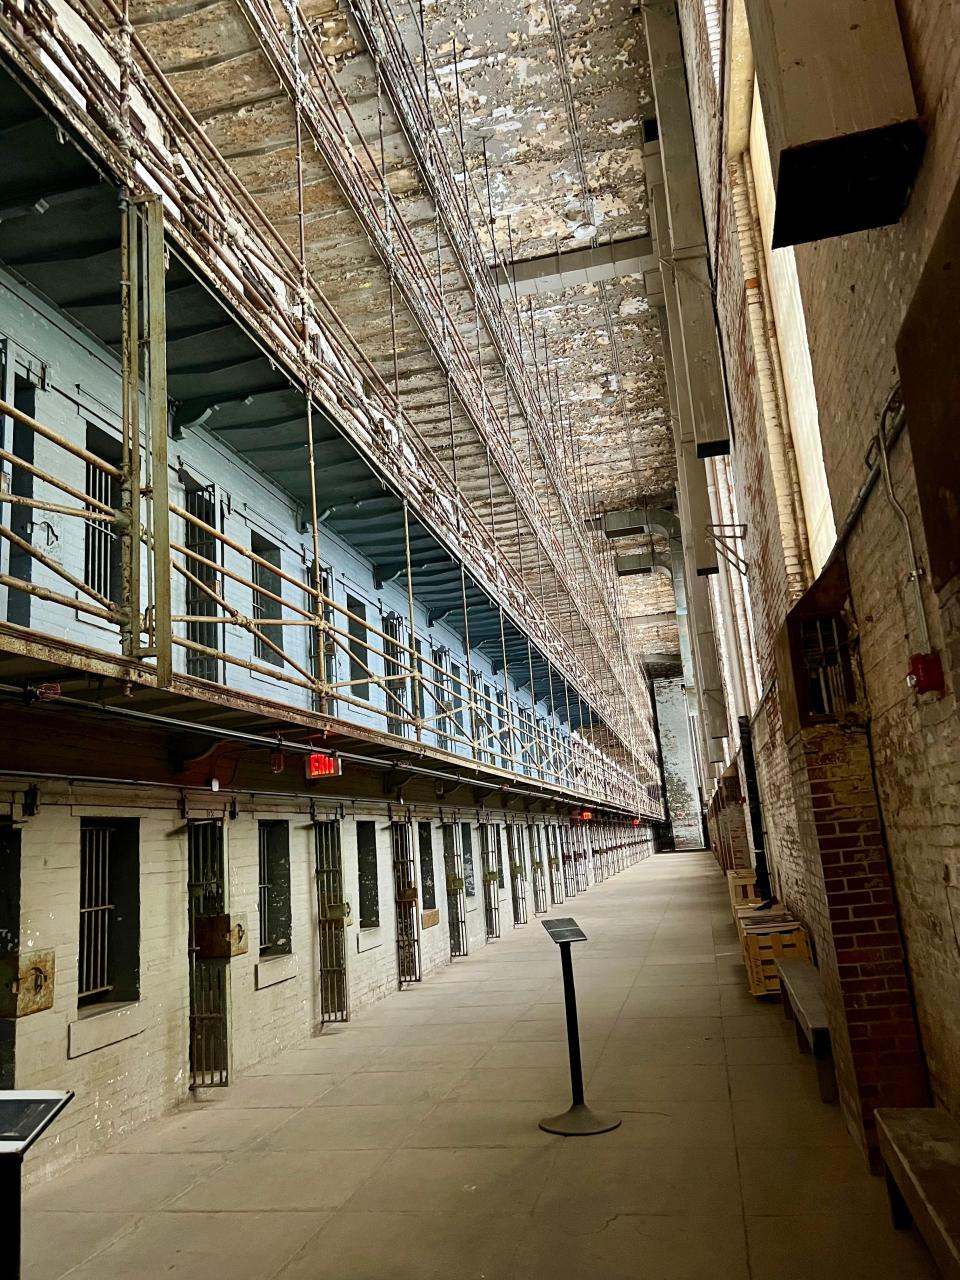 The West Cell Block at the Ohio State Reformatory is going to be restored. It stands 5-tiers high and is built from steel, brick and mortar. There are 320 cells in this space, according to OSR.